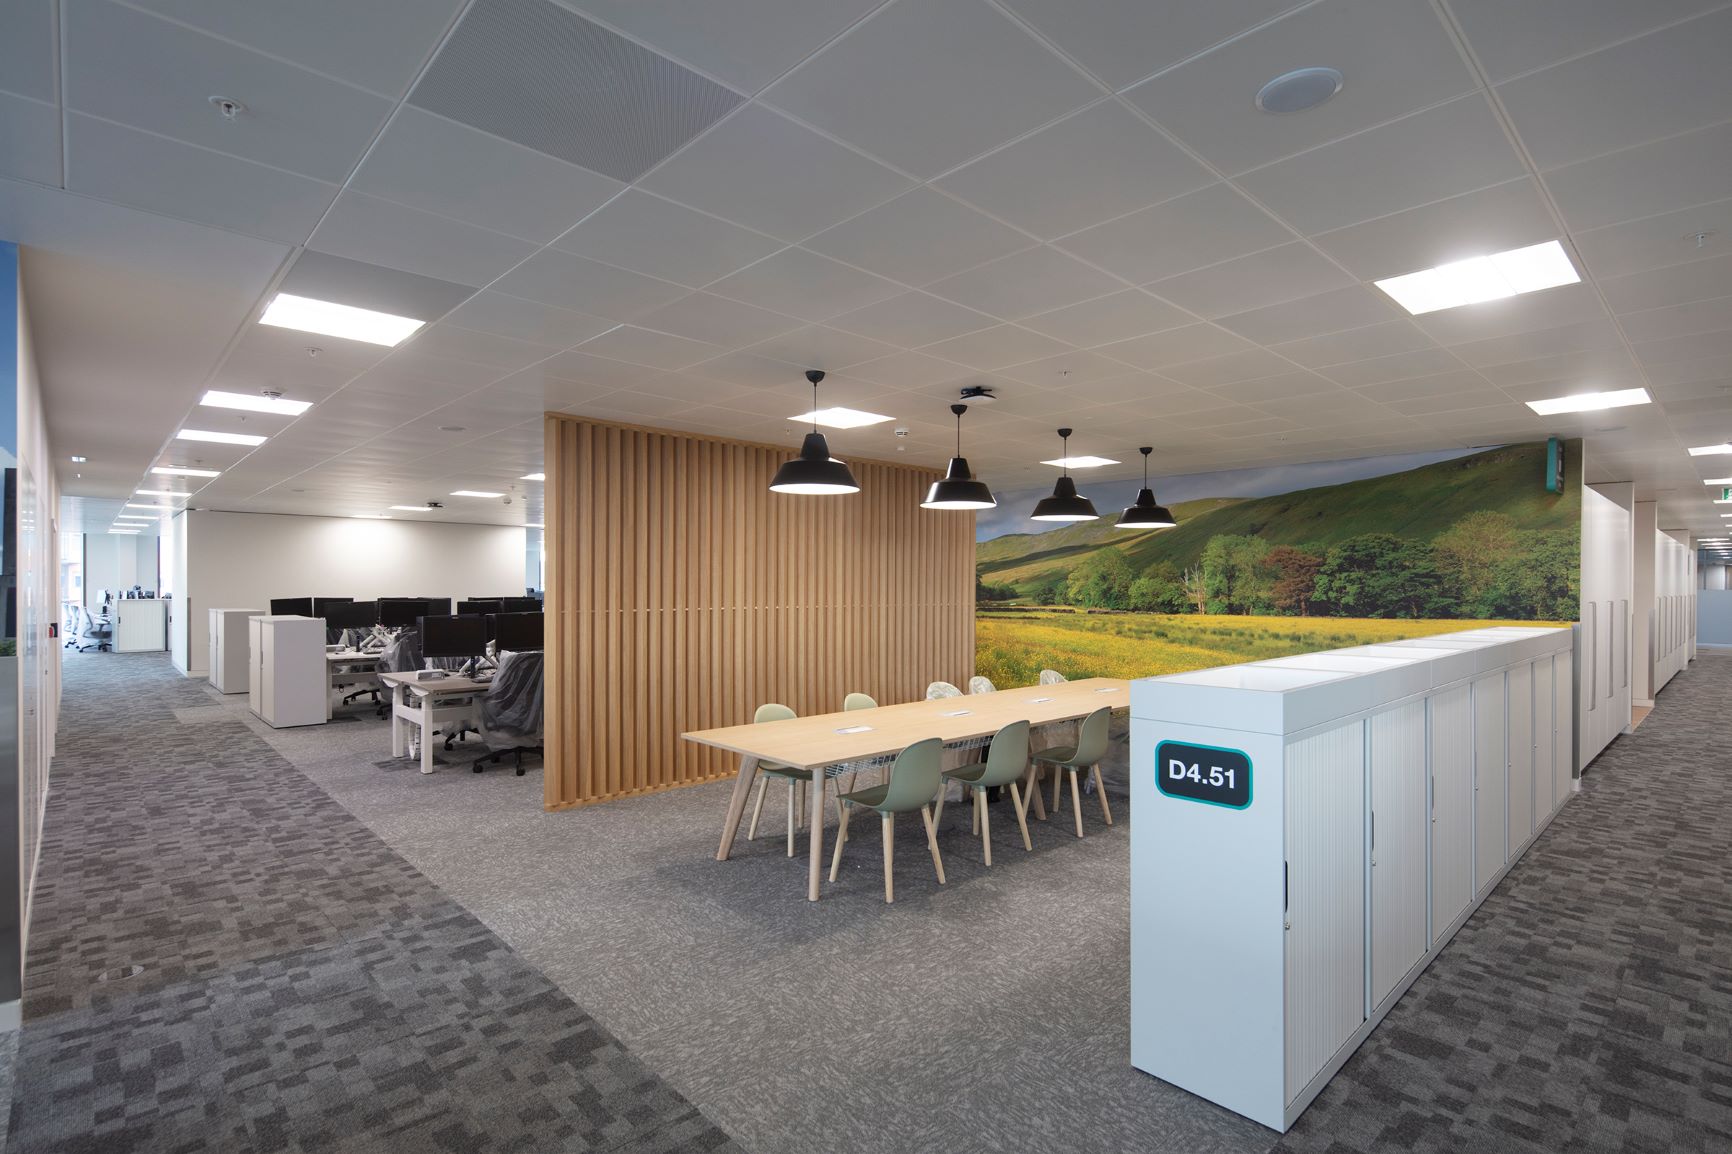 The latest UK Government Hub opens in Leeds with air distribution products by Waterloo. @WaterlooHVAC